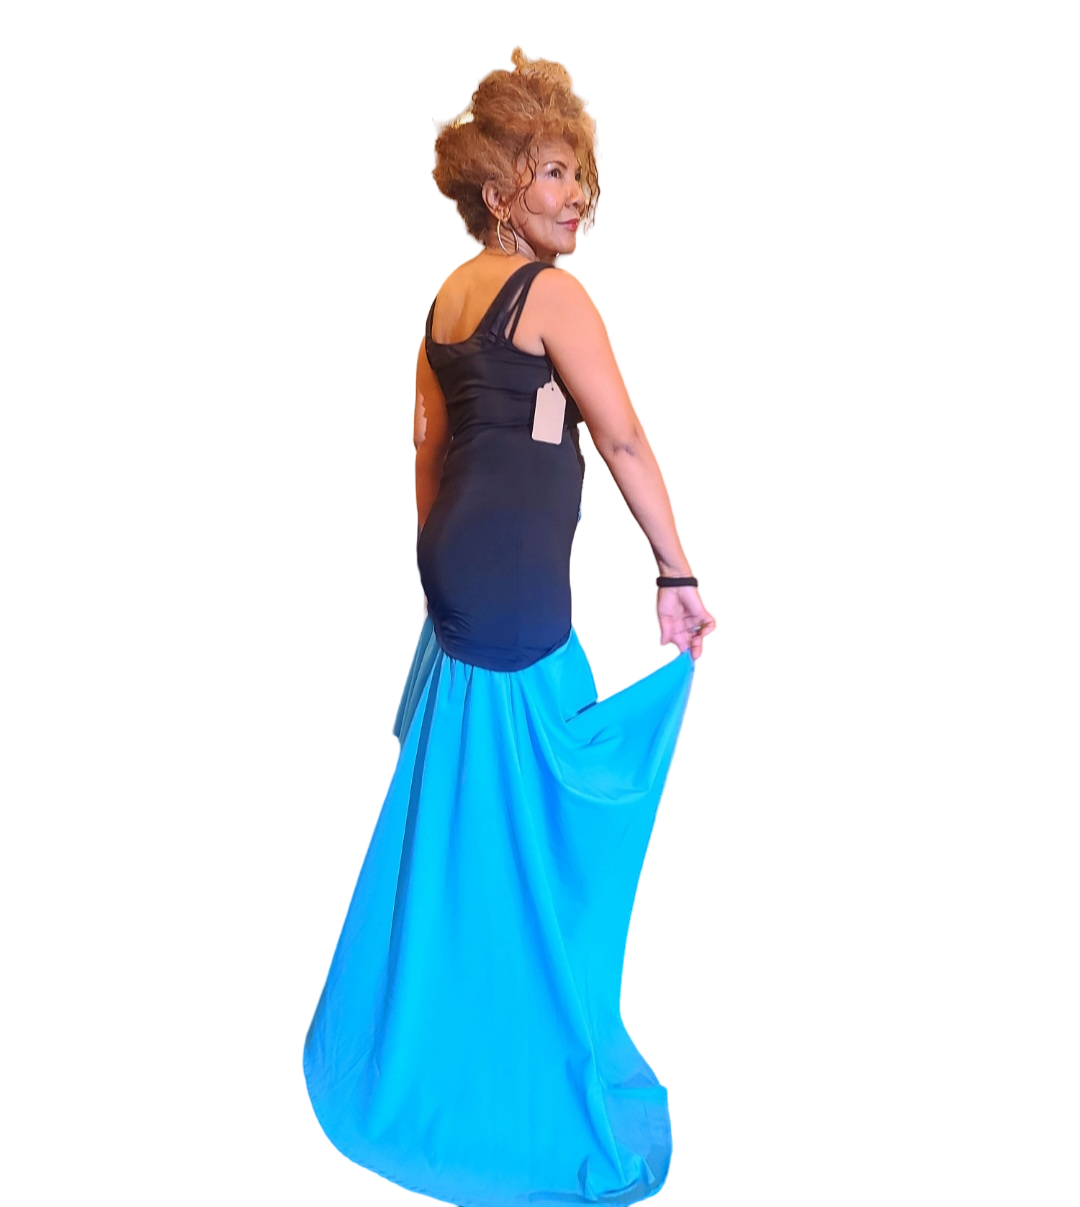 Cascade Blue Dress. Stunning, head turning design. Cascading ruffle hem. Perfect to fit body shape. This is the ultimate feminine any occasion dress...